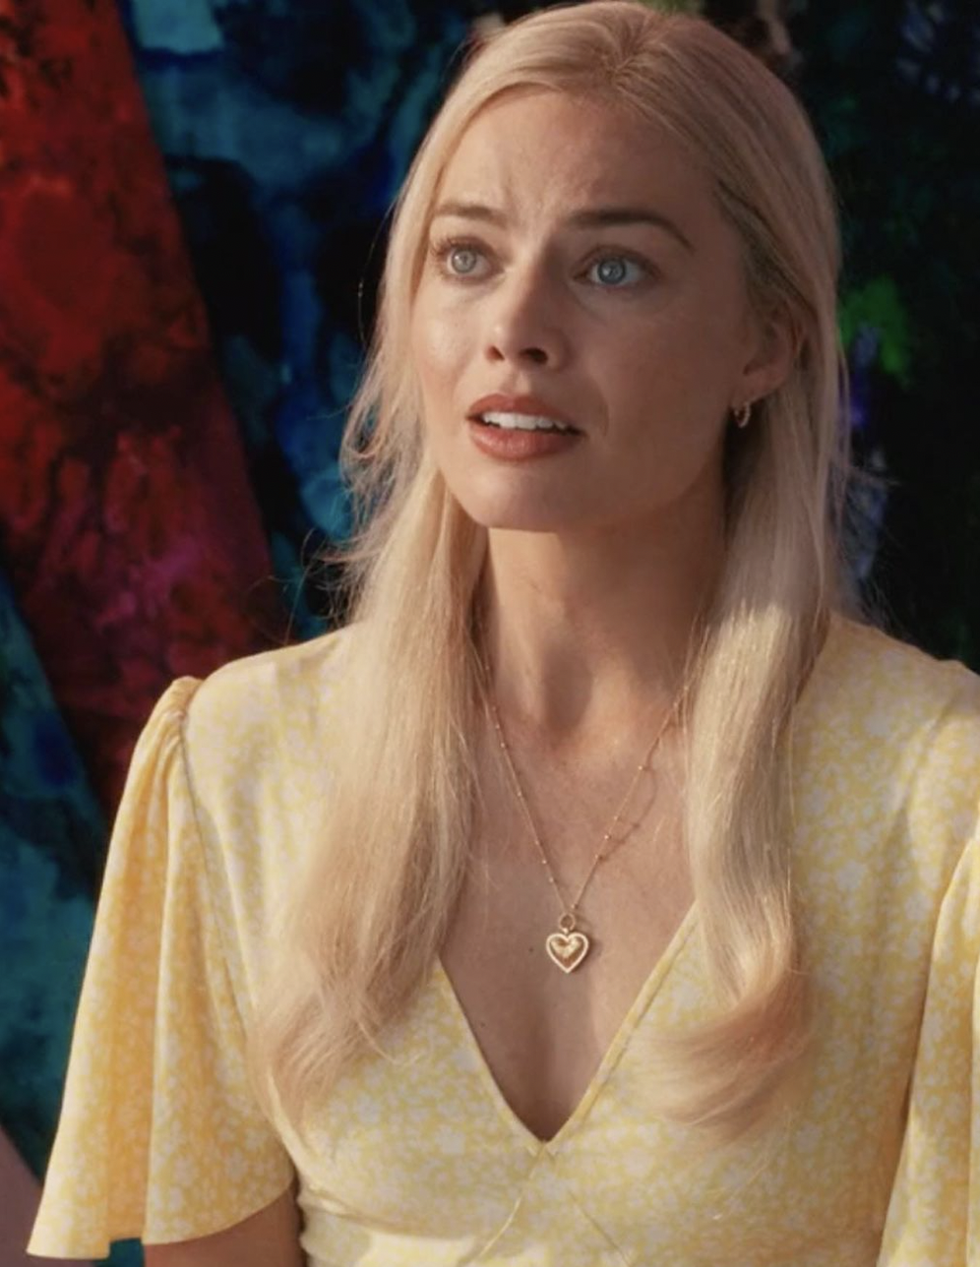 Judge the Jewels: Margot Robbie Wears Iconic Chanel '95 Necklace As Barbie